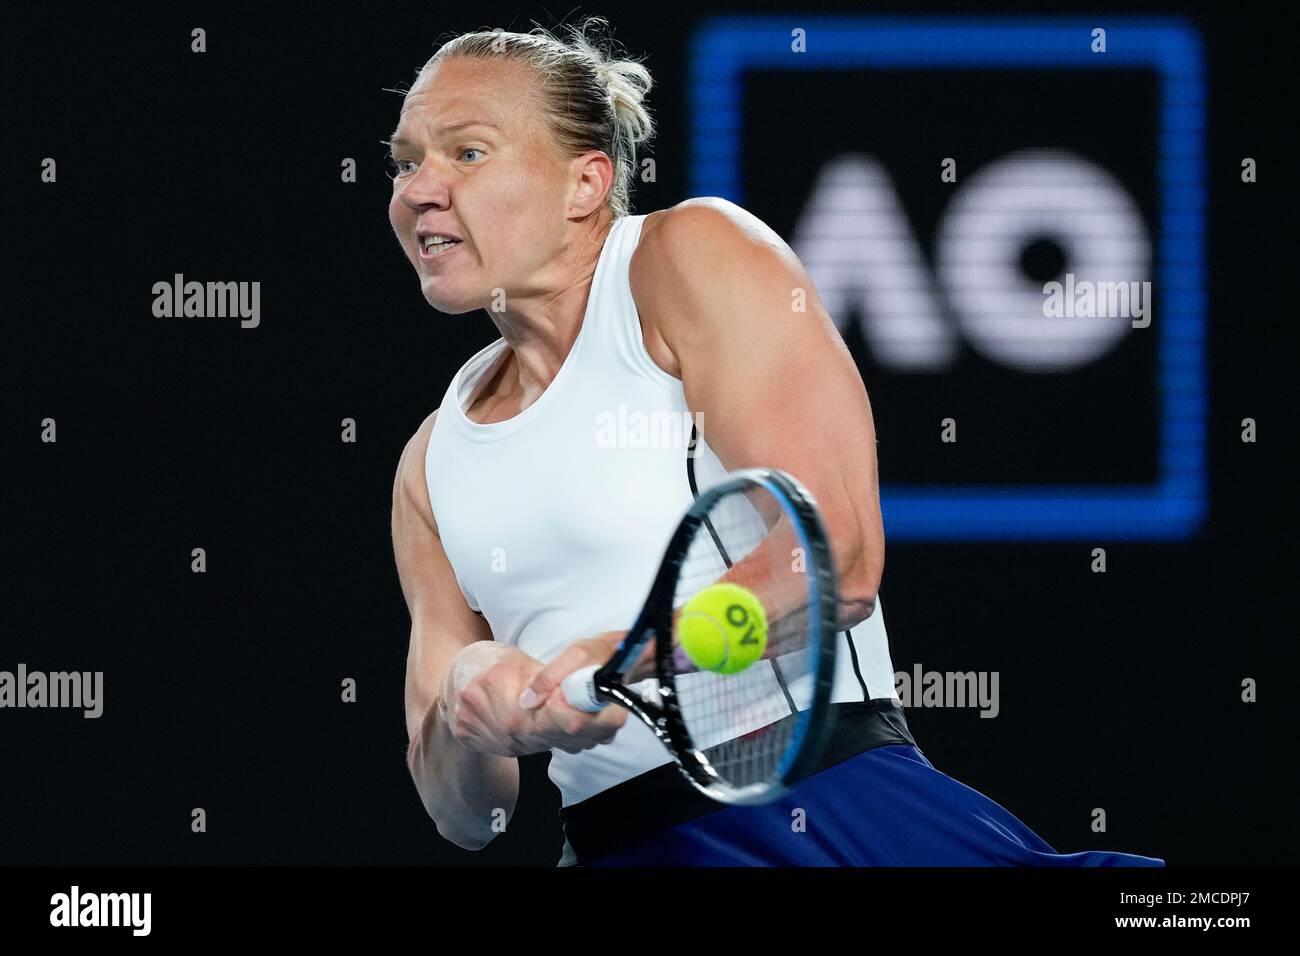 Kaia Kanepi of Estonia plays a backhand return to Angelique Kerber of Germany during their first round match at the Australian Open tennis championships in Melbourne, Australia, Tuesday, Jan